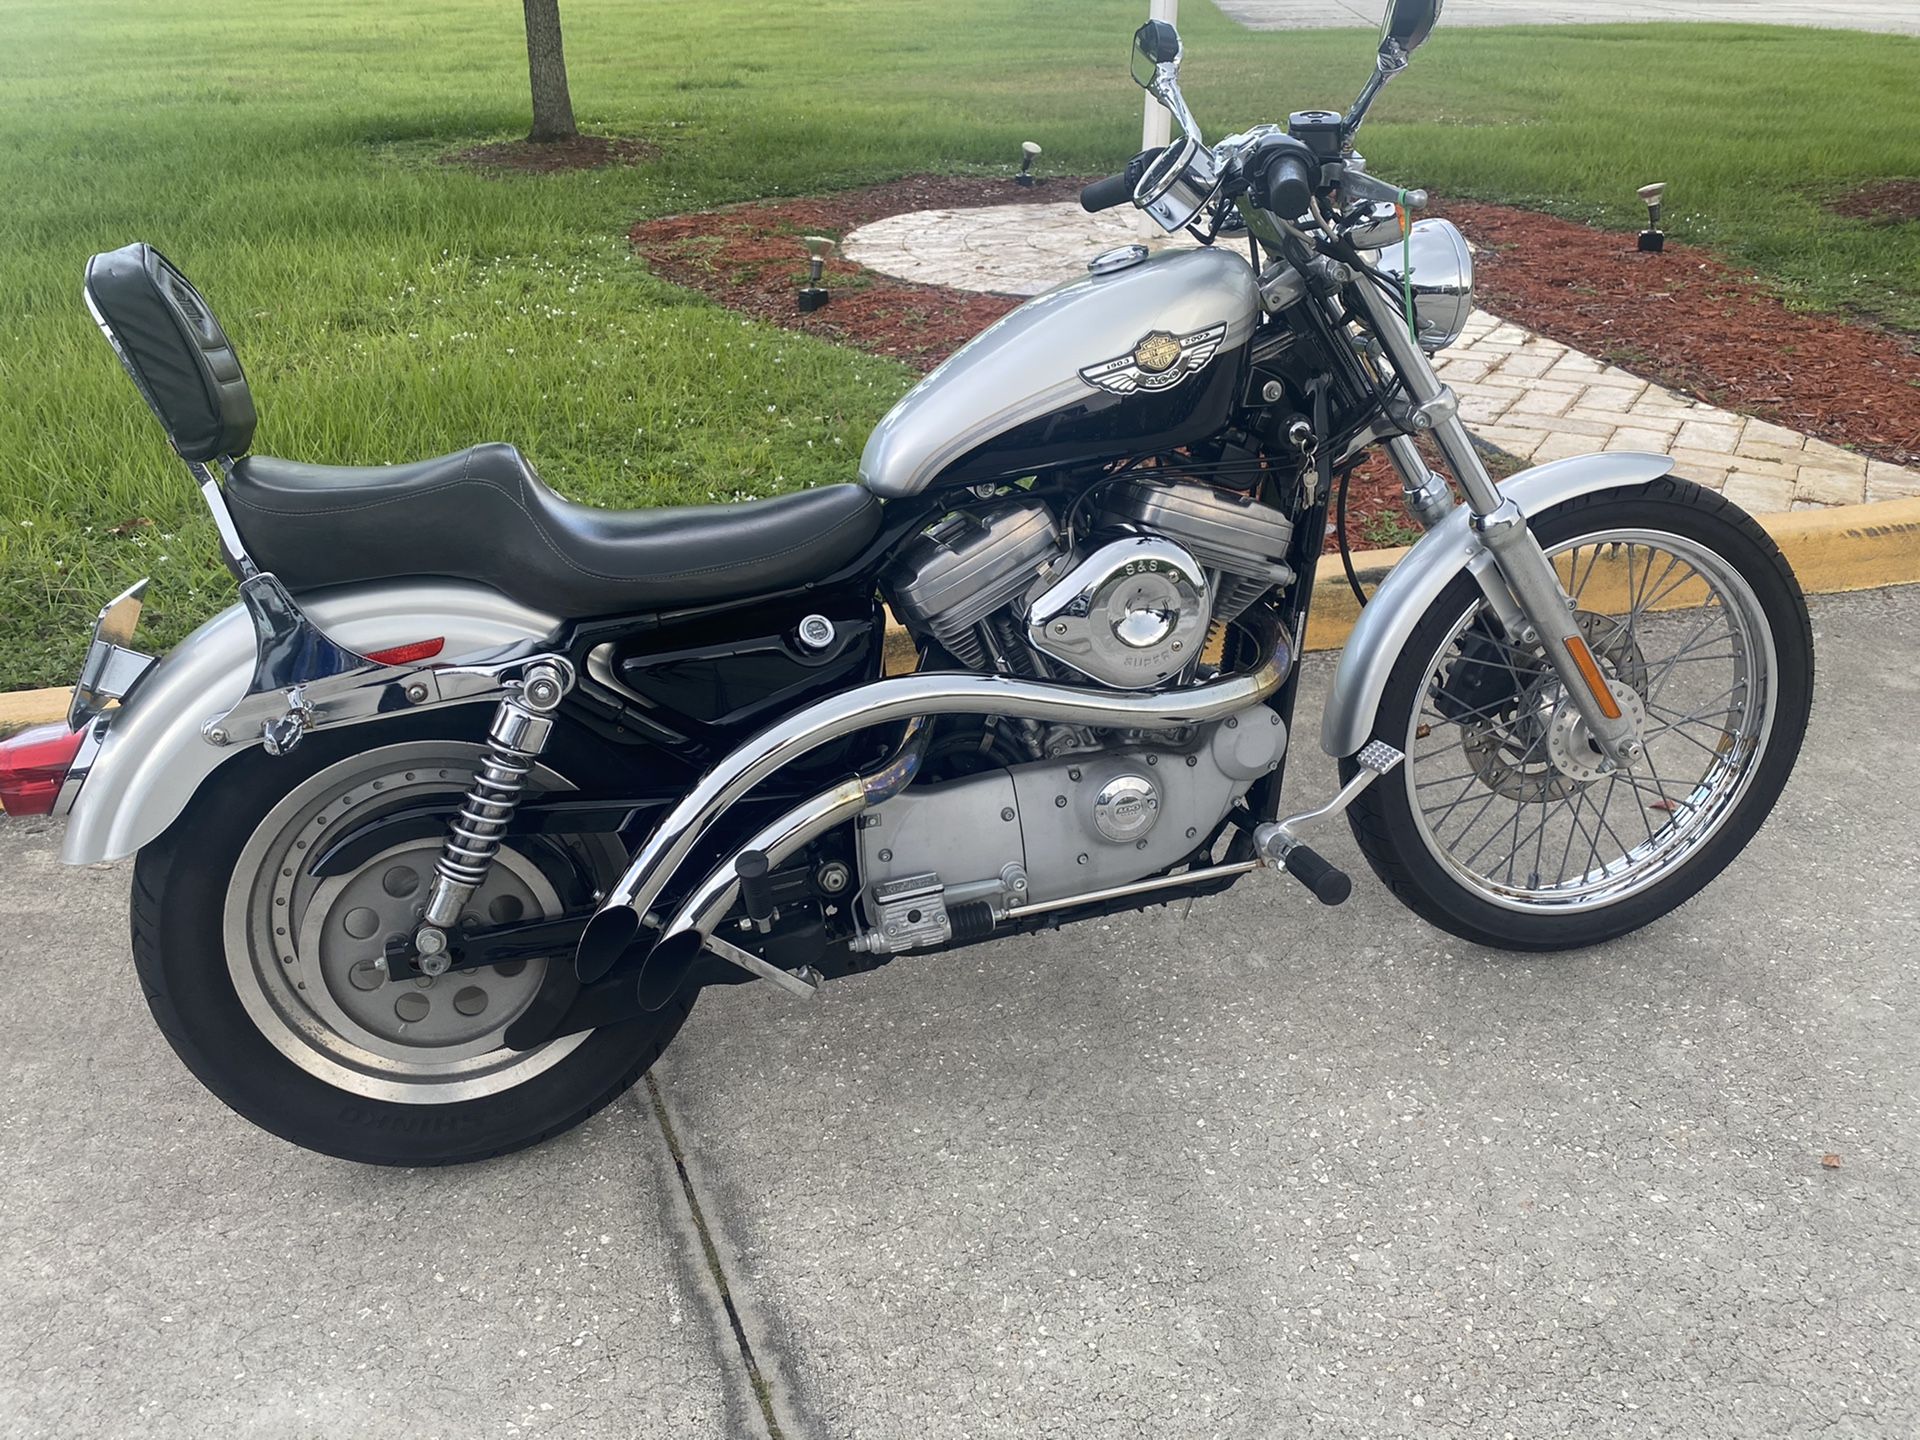 2003 xlh 883 sportster (Anniversery edition)